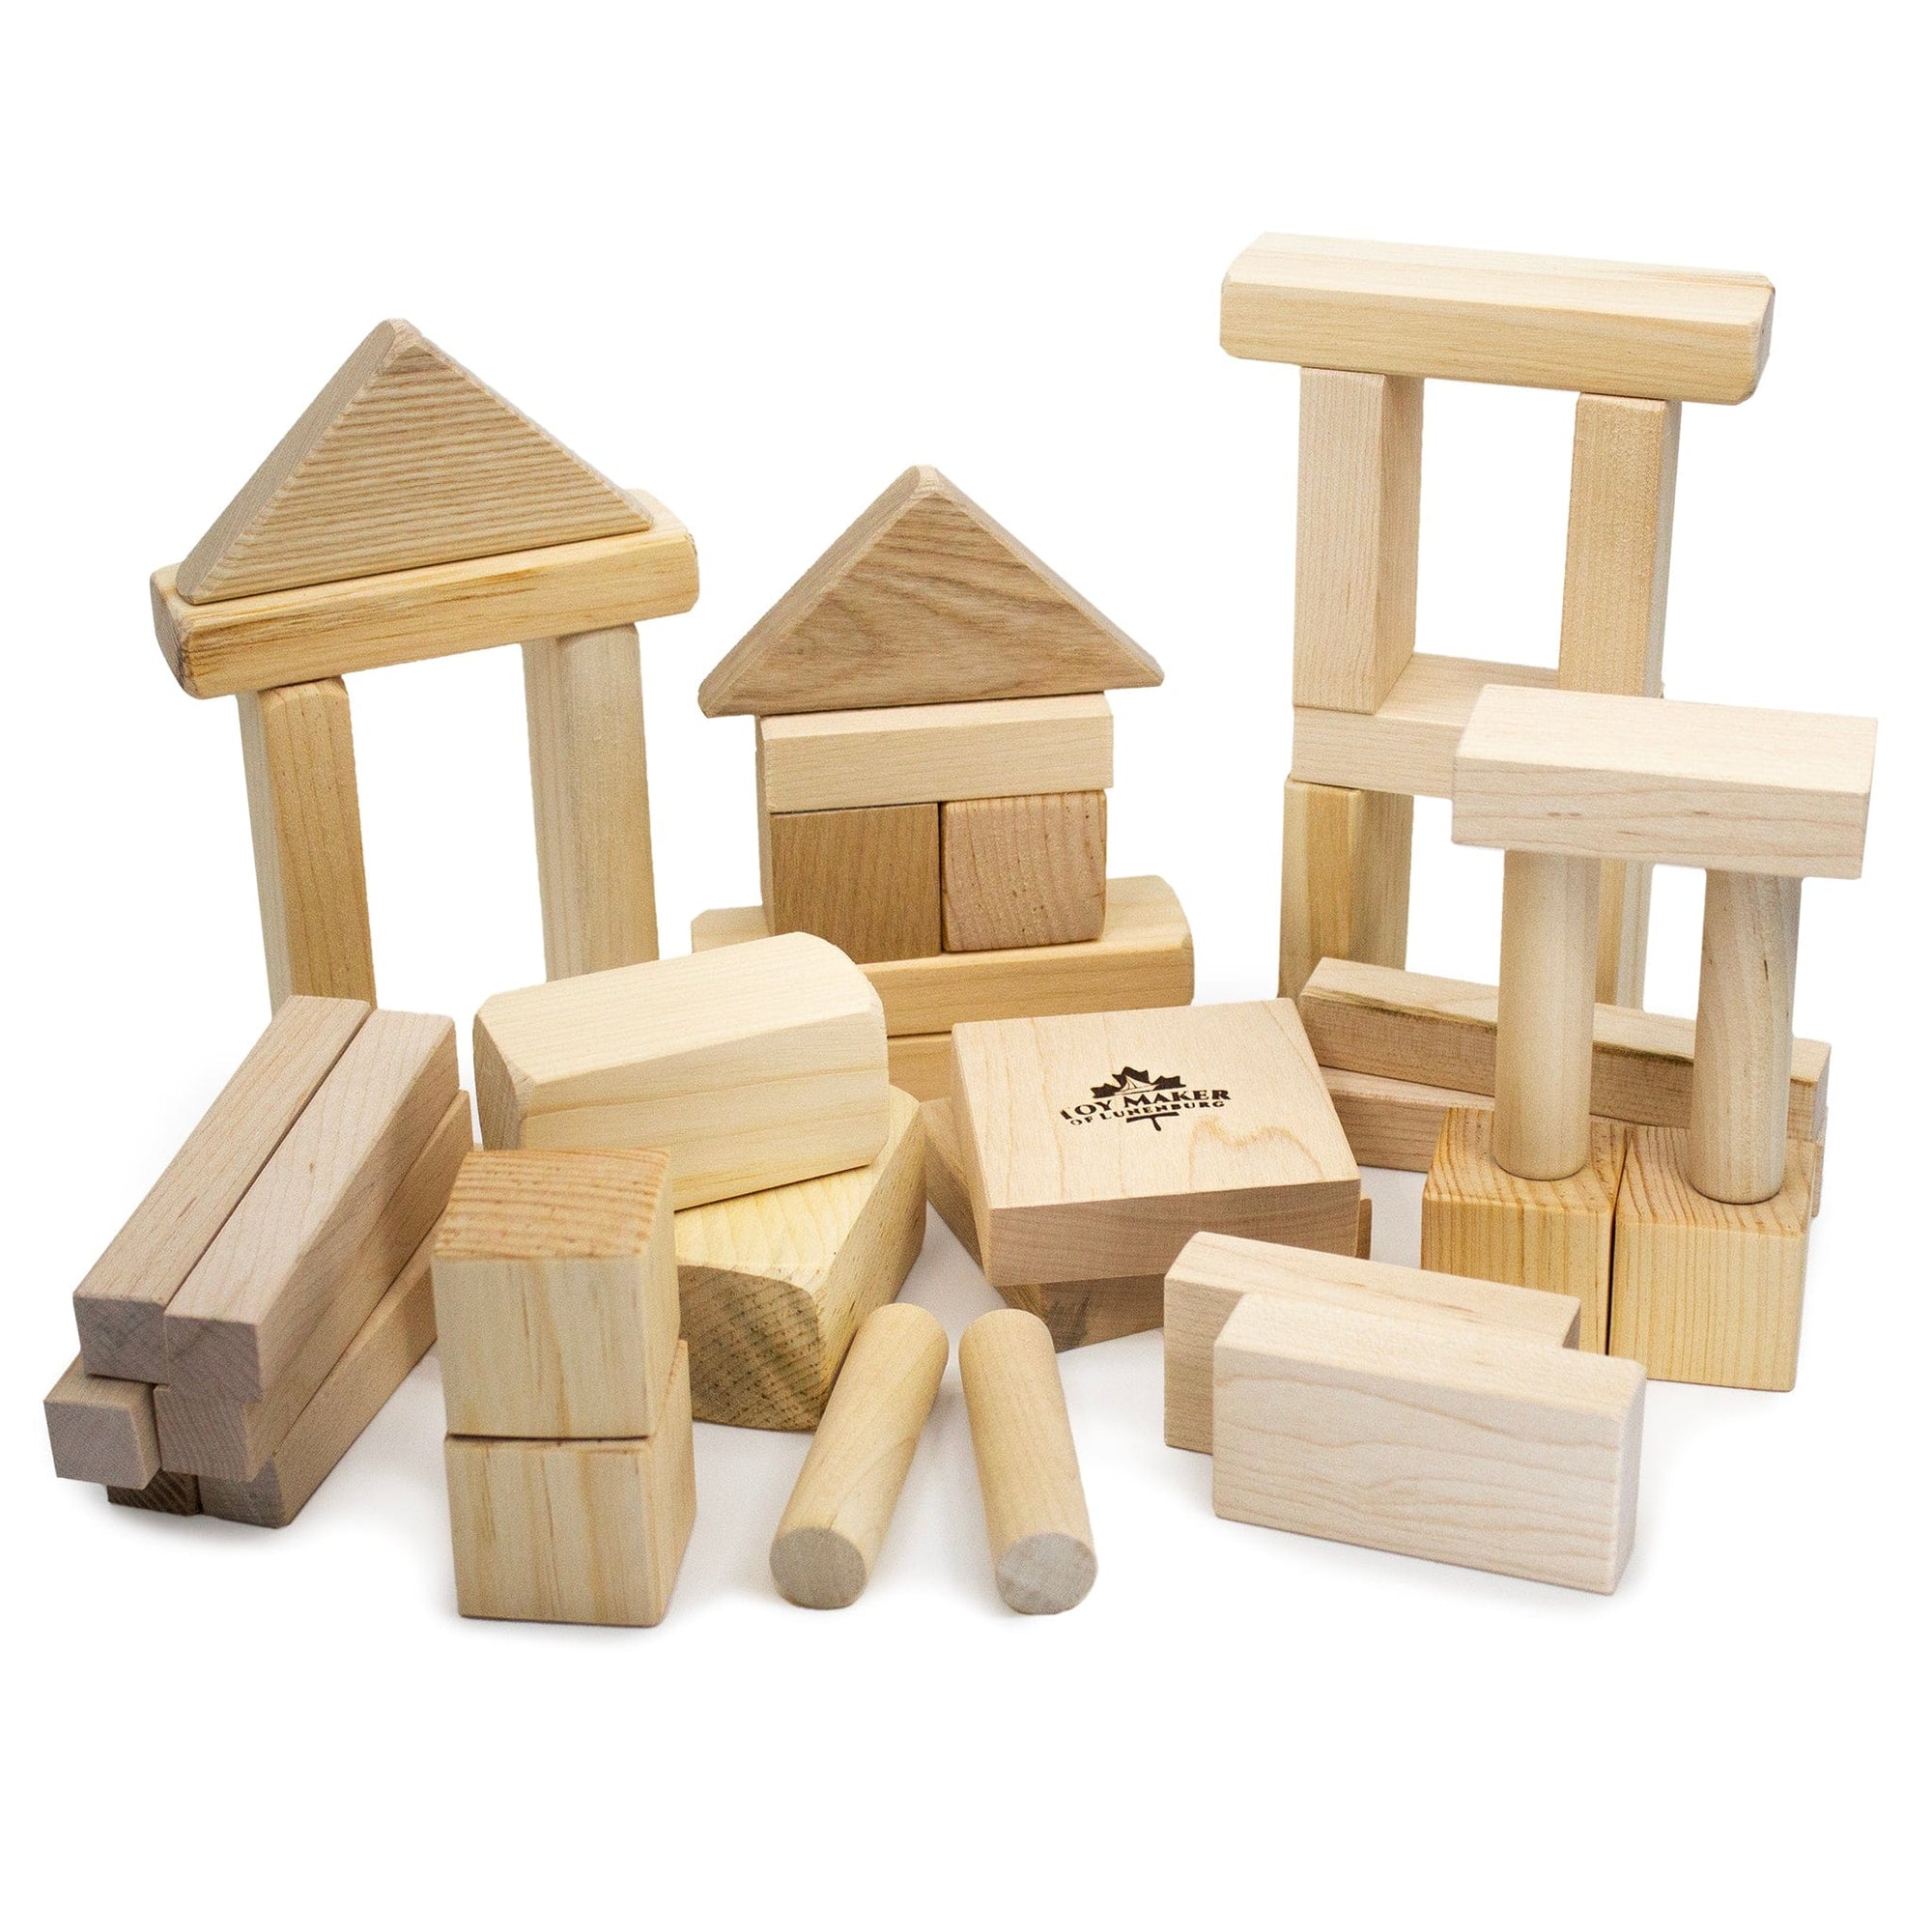 https://cdn.shopify.com/s/files/1/2158/5455/products/toy-maker-of-lunenburg-educational-creative-toys-wooden-building-block-set-for-kids-29761103069235_2000x.jpg?v=1670423588